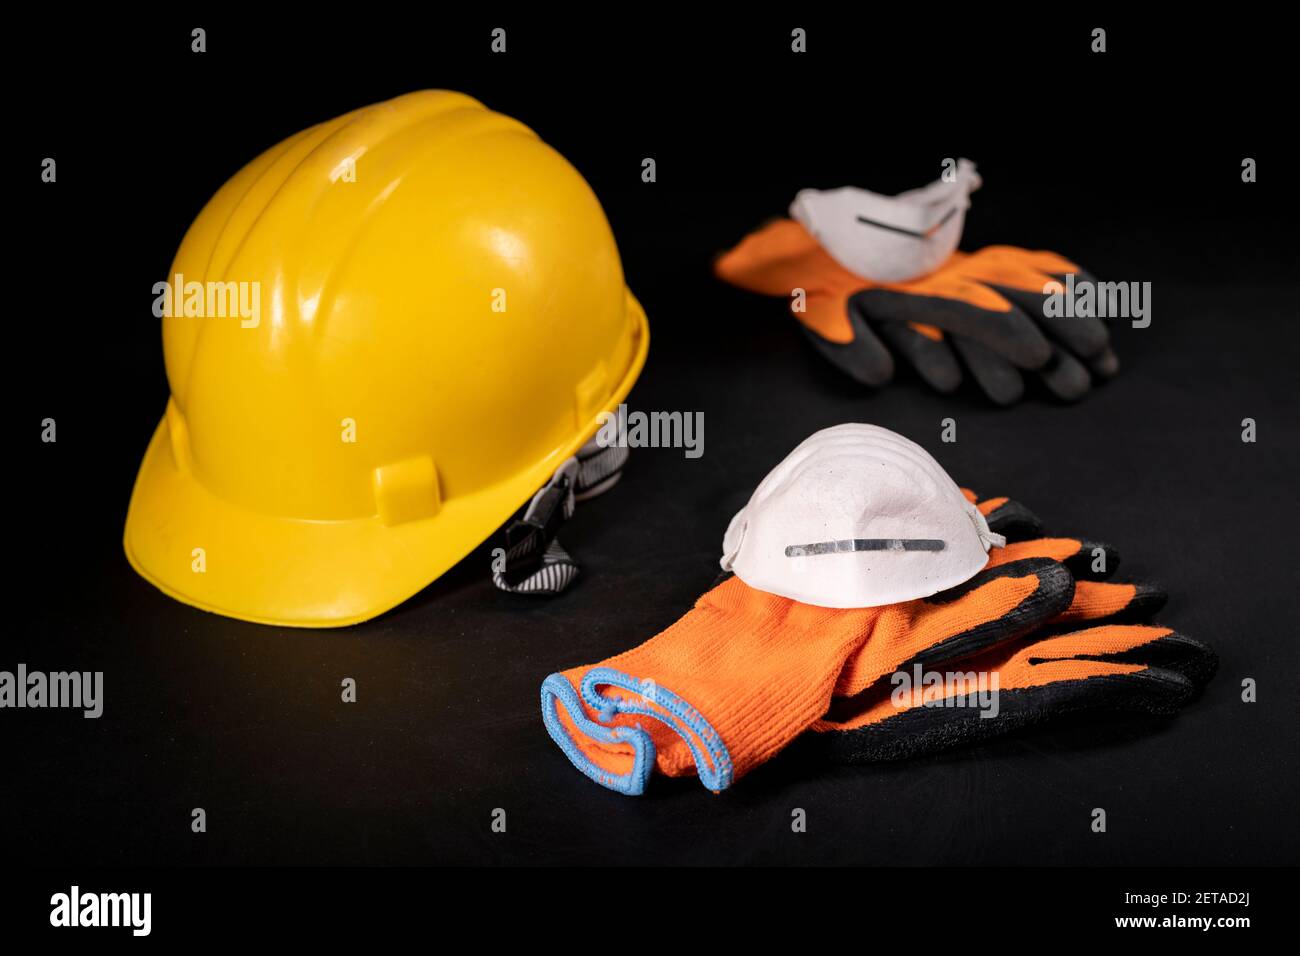 Work gloves, hard hat and dust mask. Protective accessories for construction workers. Dark background. Stock Photo